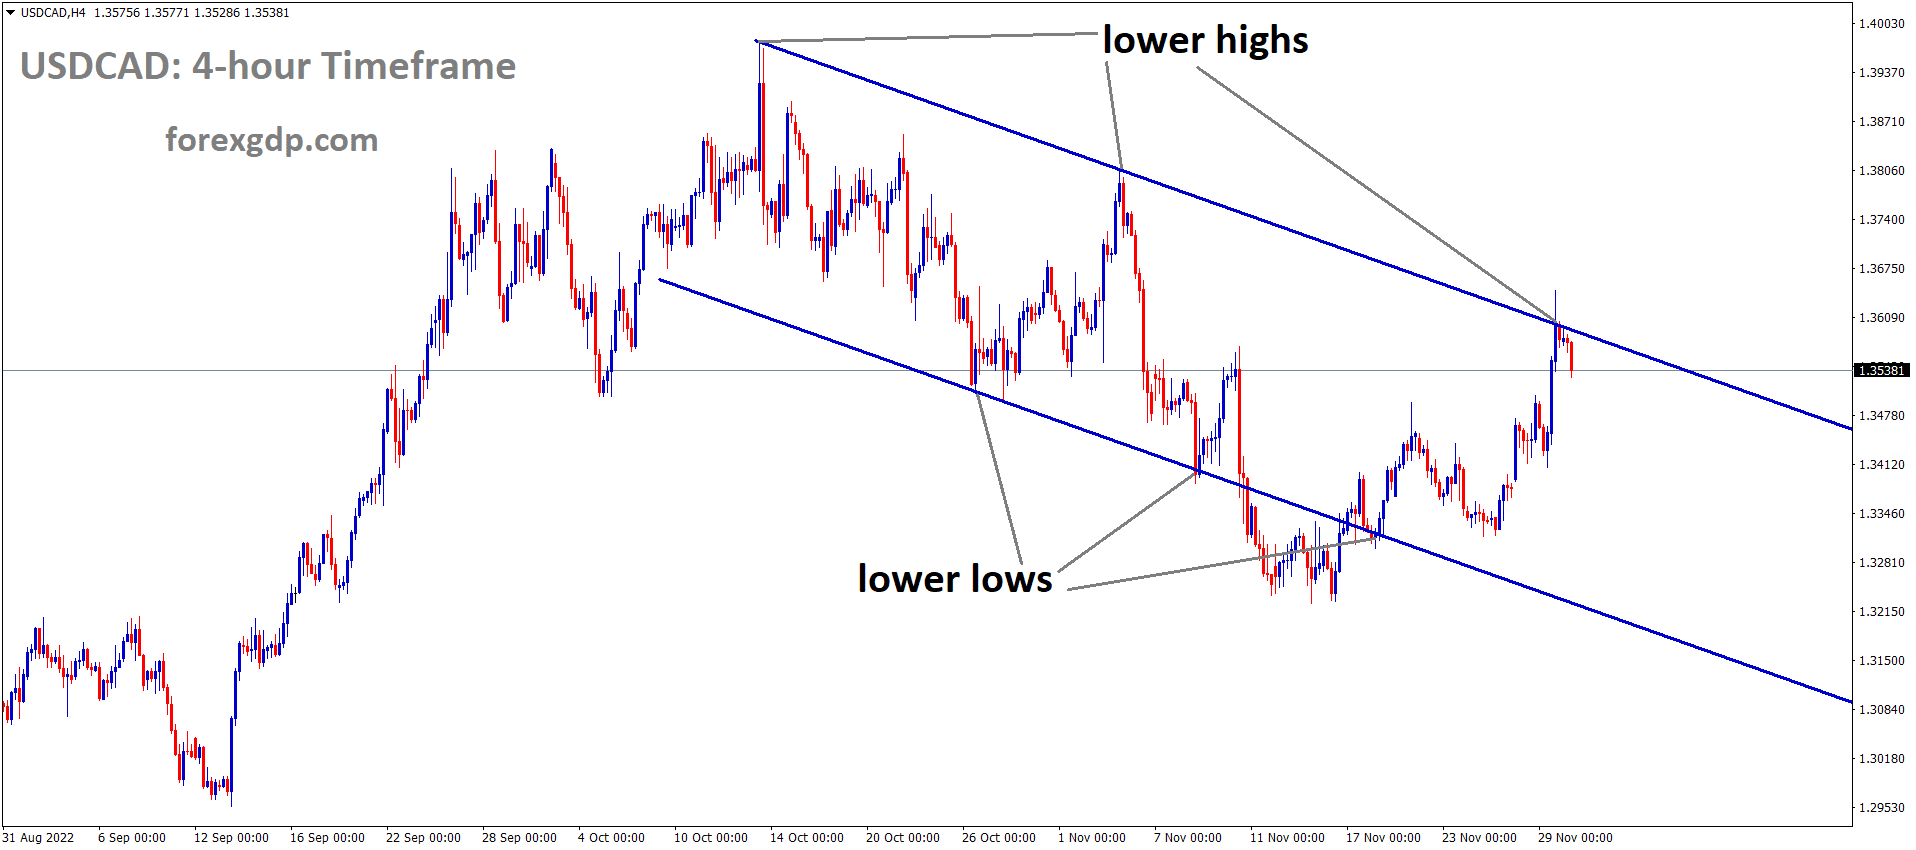 USDCAD is moving in the Descending channel and the market has fallen from the lower high area of the channel 1